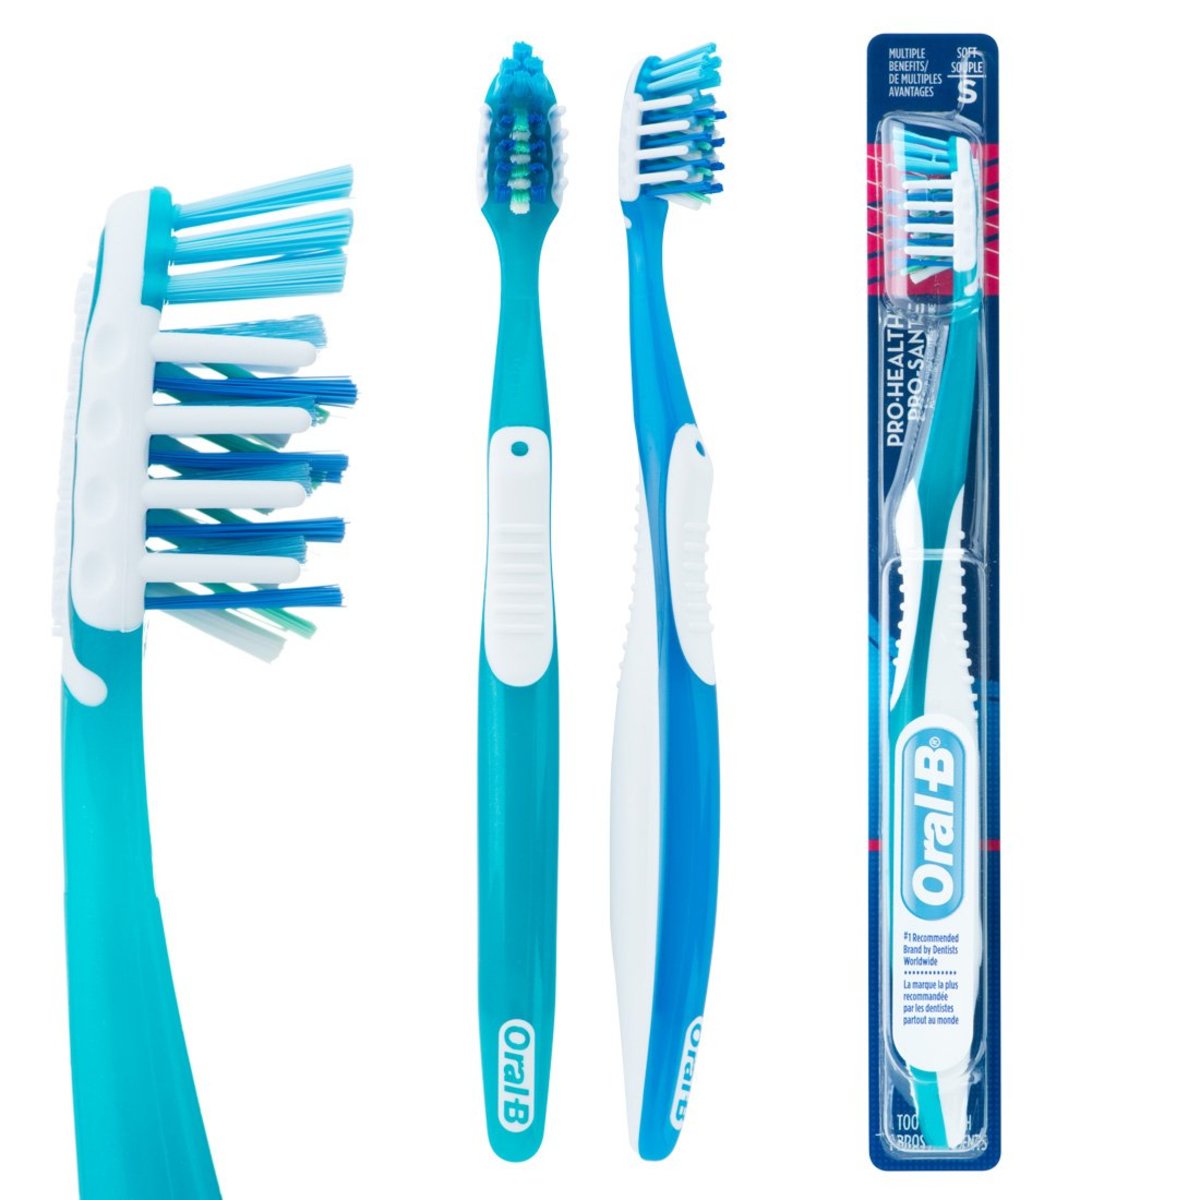 Different kinds of toothbrushes